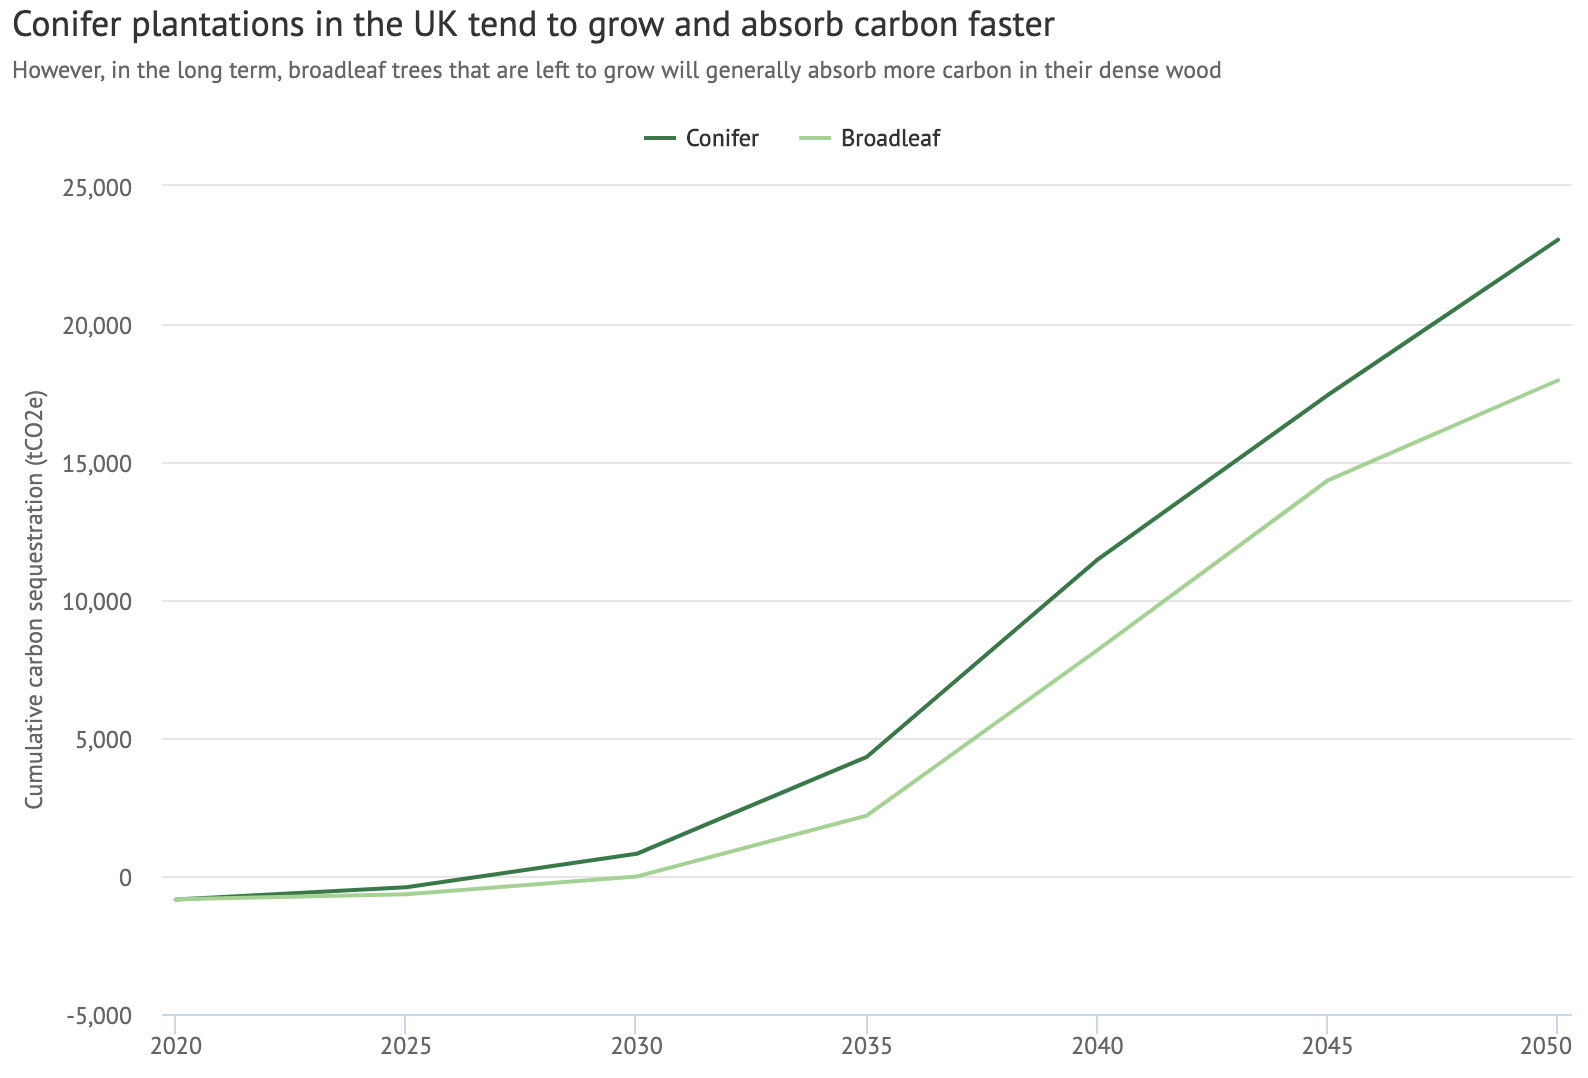 Carbon sequestration up until the 2050 net-zero deadline in a conifer (dark) and broadleaf (light) stand of trees. This chart is based on 50-hectare plantations, one made up of conifers planted to the UK Forestry Standard (75% sitka spruce at yield class 20, 10% Douglas fir and Scots pine, 5% native broadleaves, 10% open space), and one a native broadleaf scheme with yield class 6 (90% broadleaves, 10% open space). Both assume no thinning or felling has taken place.